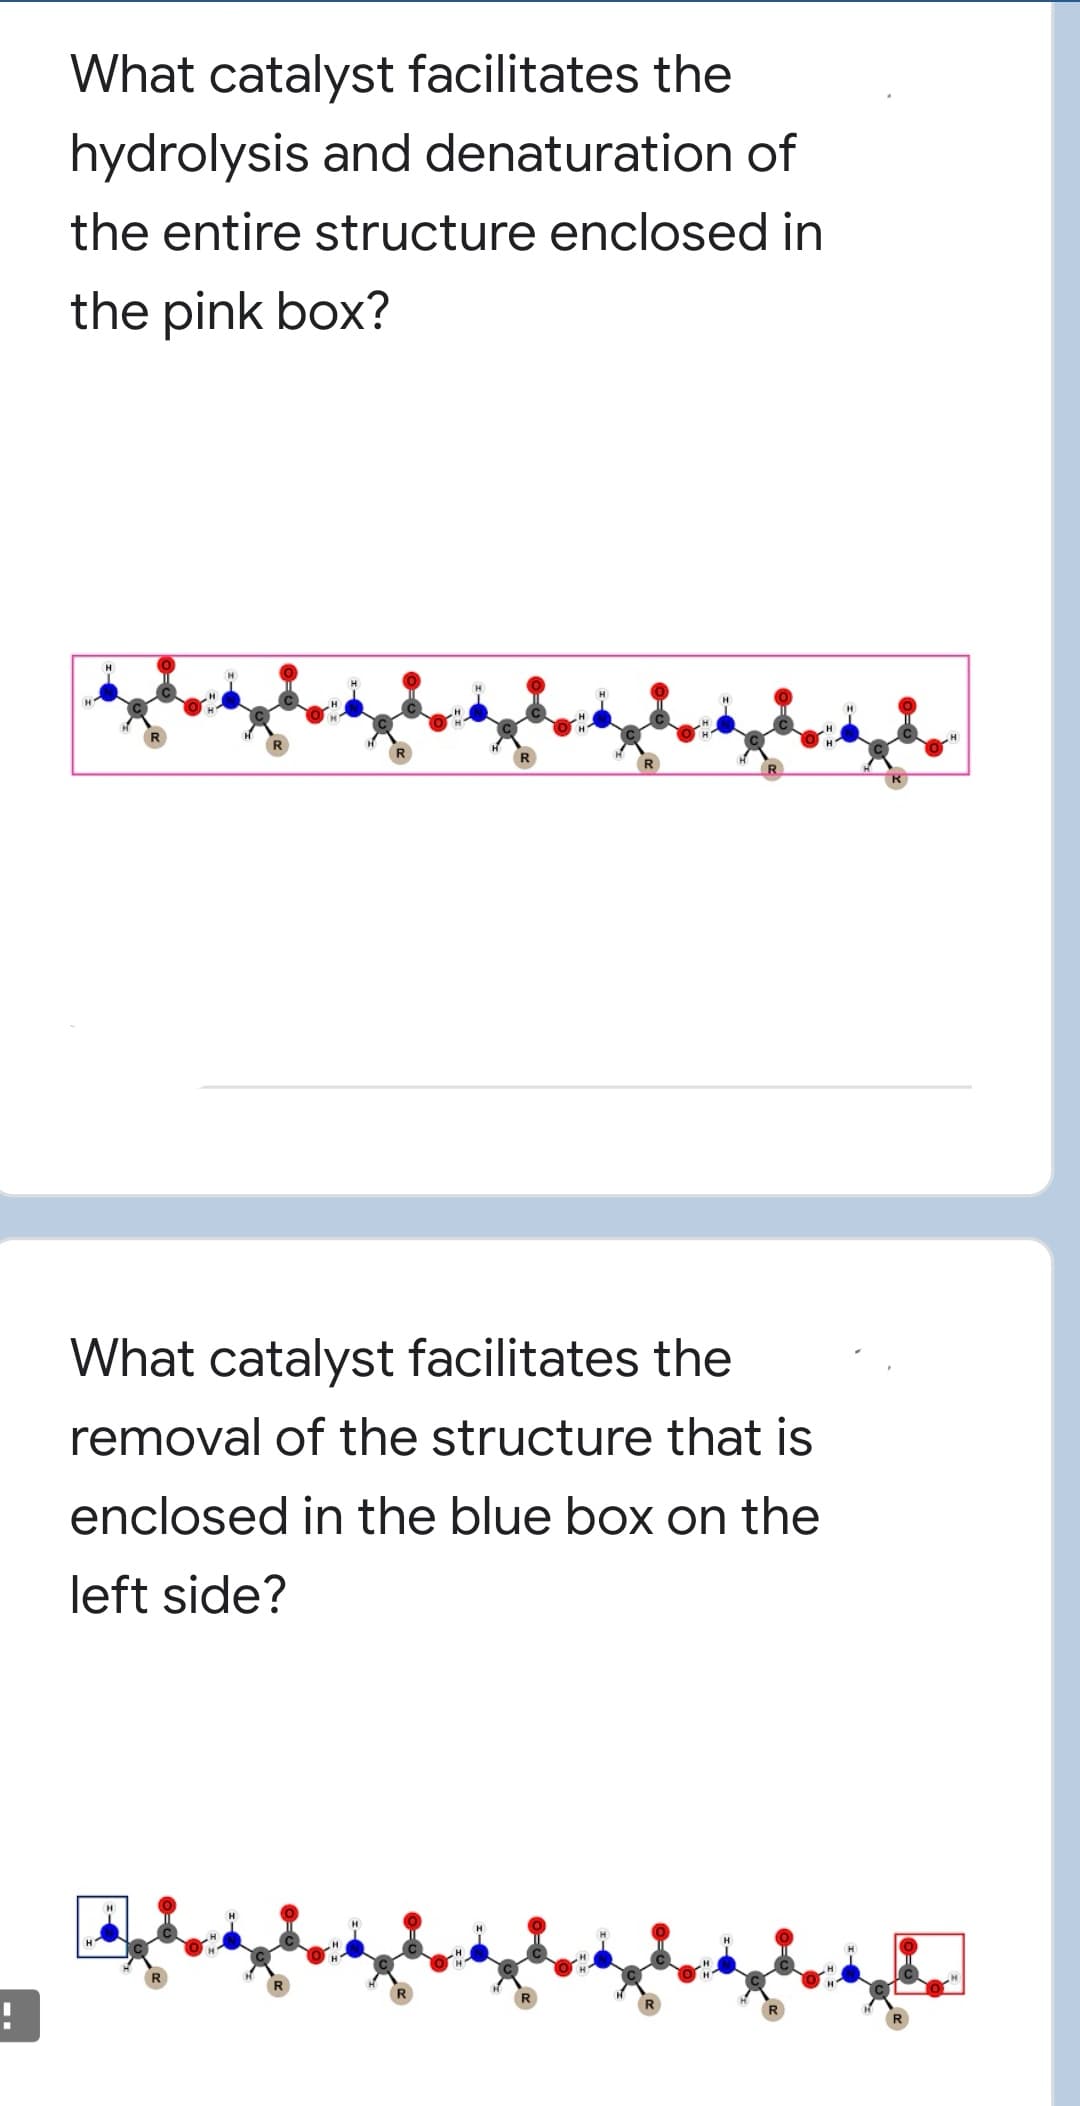 What catalyst facilitates the
hydrolysis and denaturation of
the entire structure enclosed in
the pink box?
What catalyst facilitates the
removal of the structure that is
enclosed in the blue box on the
left side?
